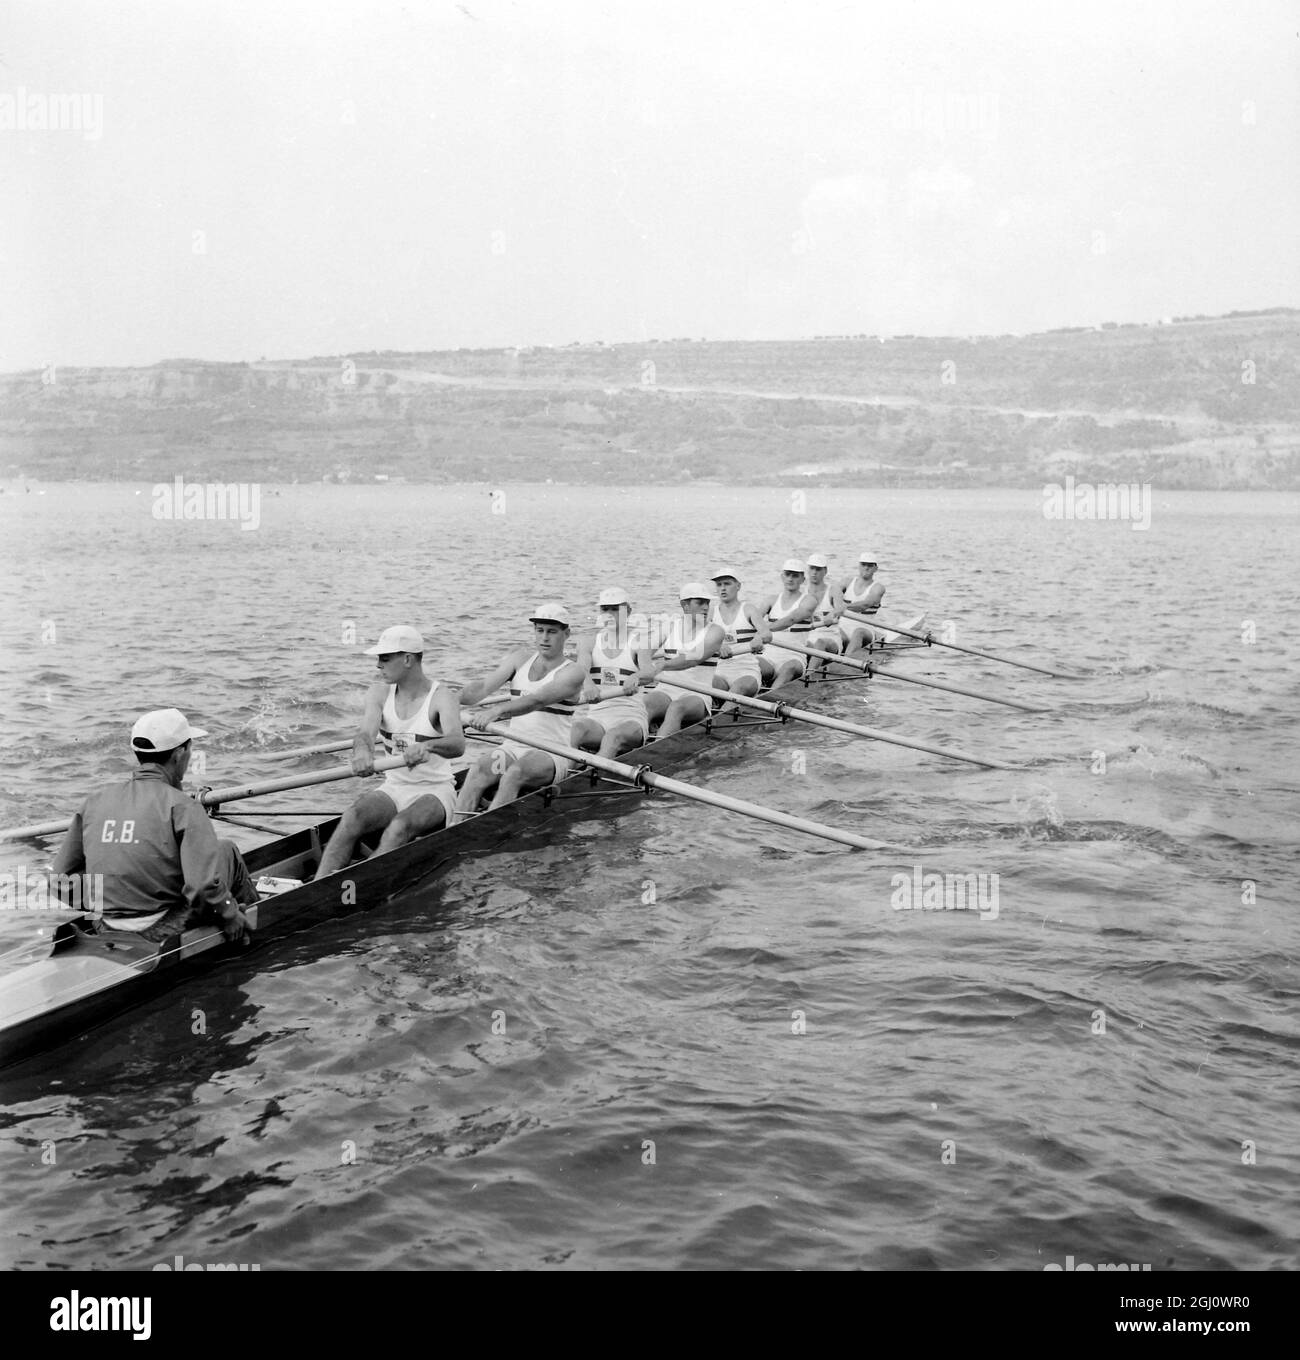 OLYMPIC GAME GB ROWING 8 PRACTICE ROME 21 AUGUST 1960 Stock Photo